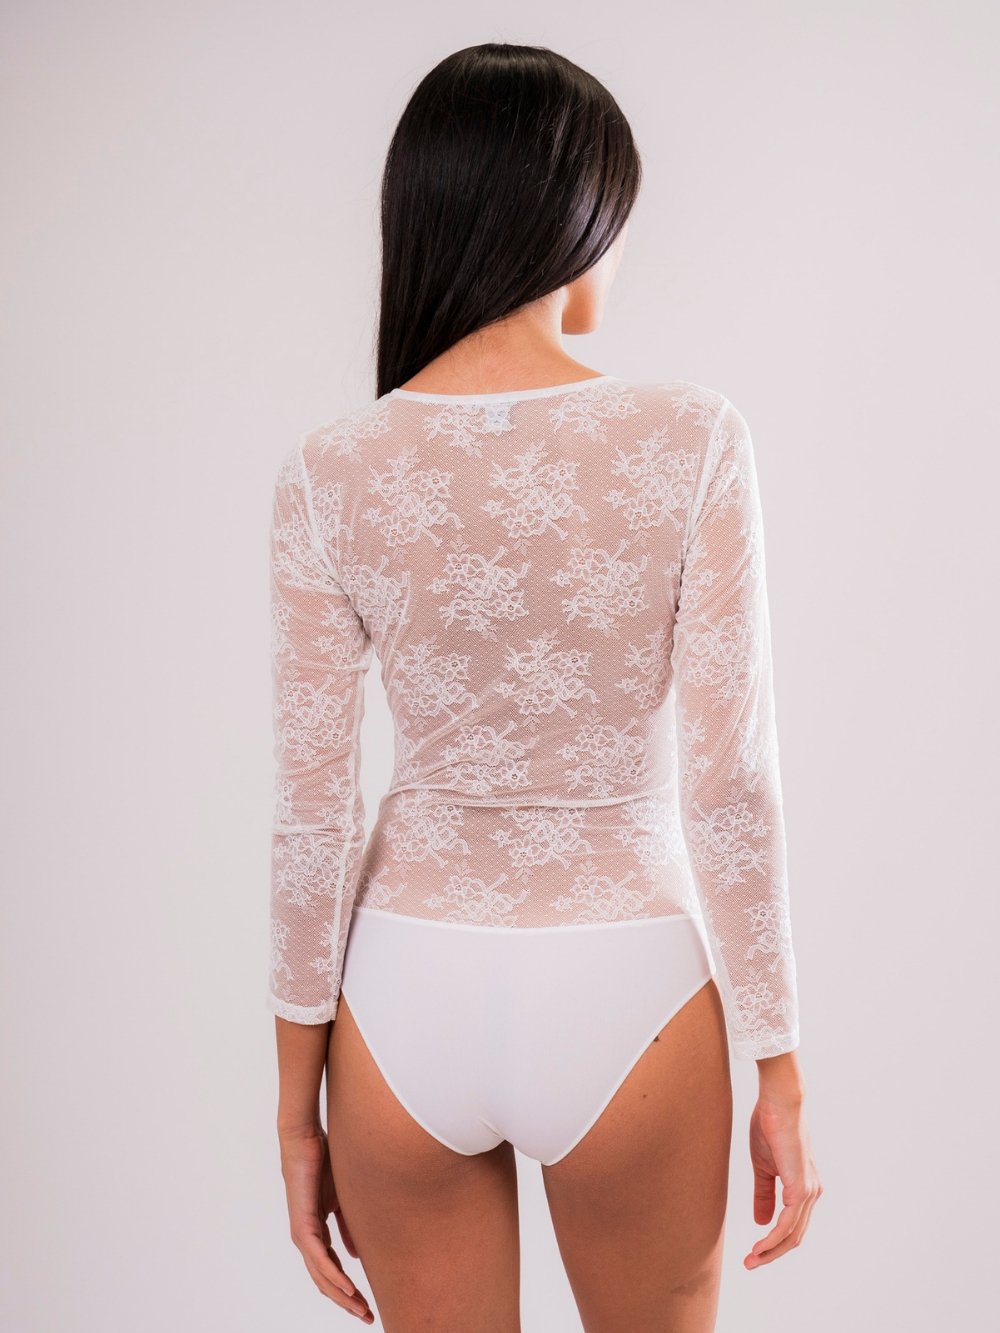 Body Manica Lunga in Pizzo Bianco - Carami - Caramì Lingerie & Activewear Made in Italy